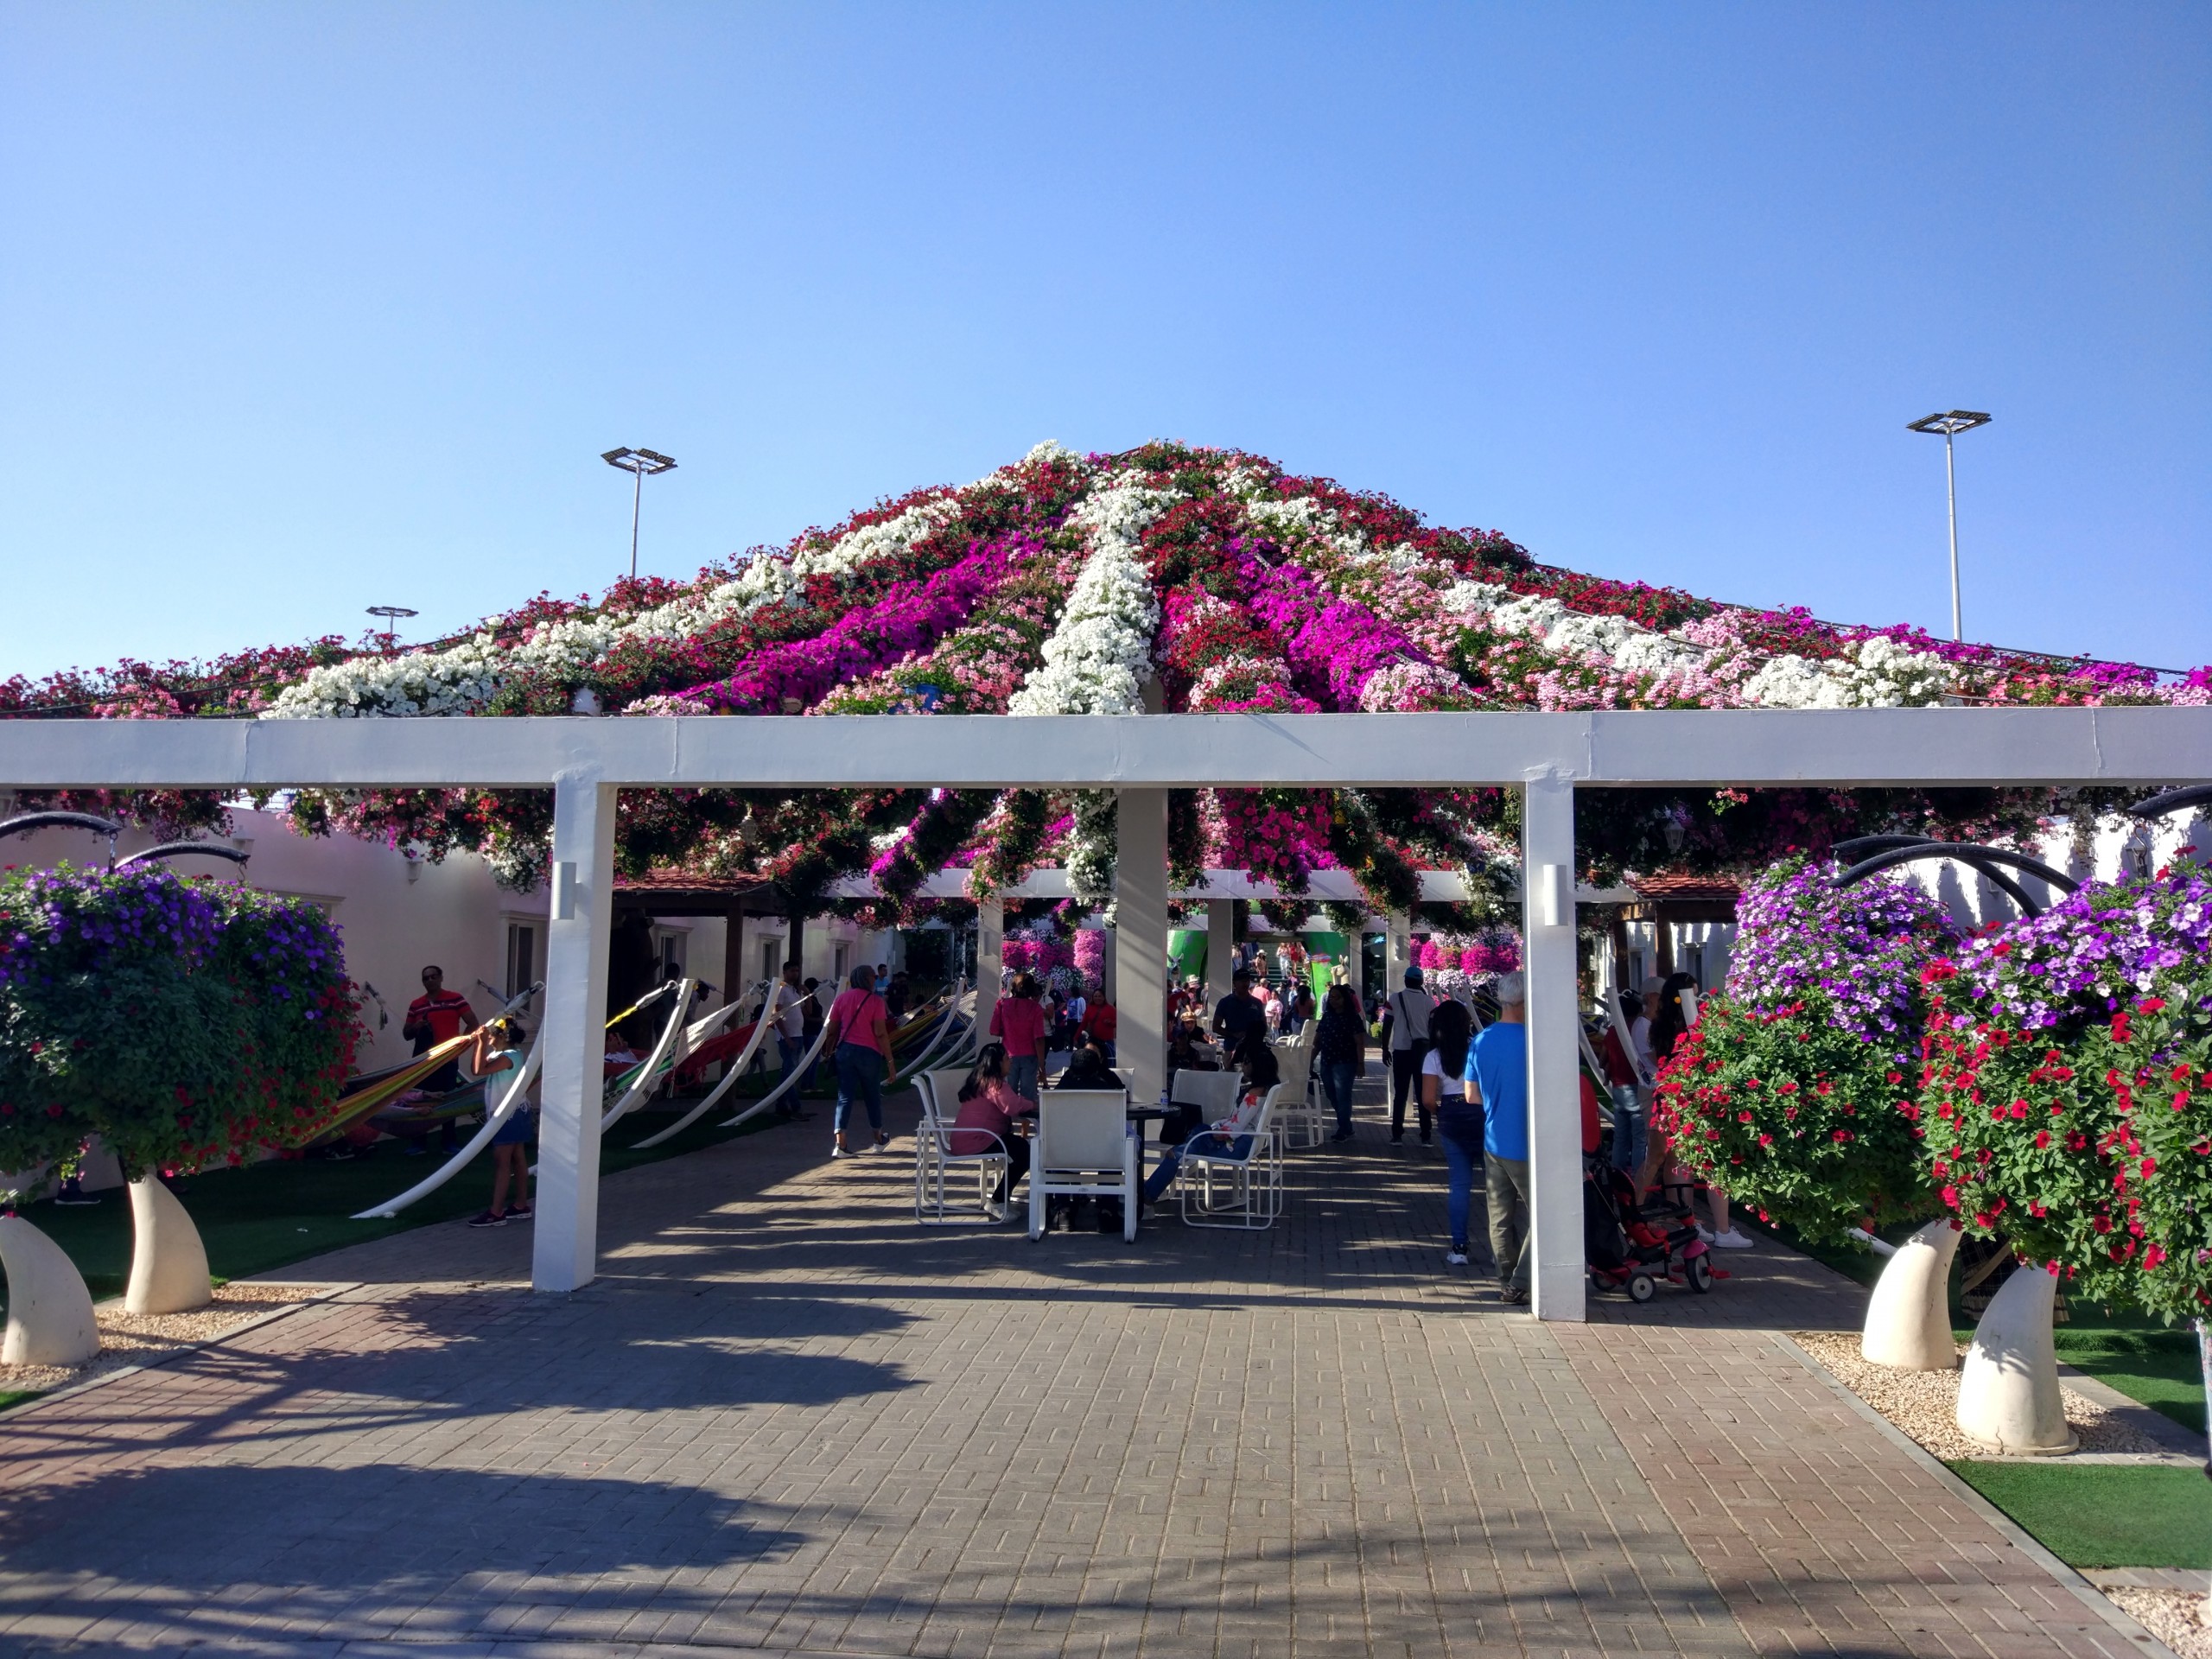 Glimpse of Miracle Garden